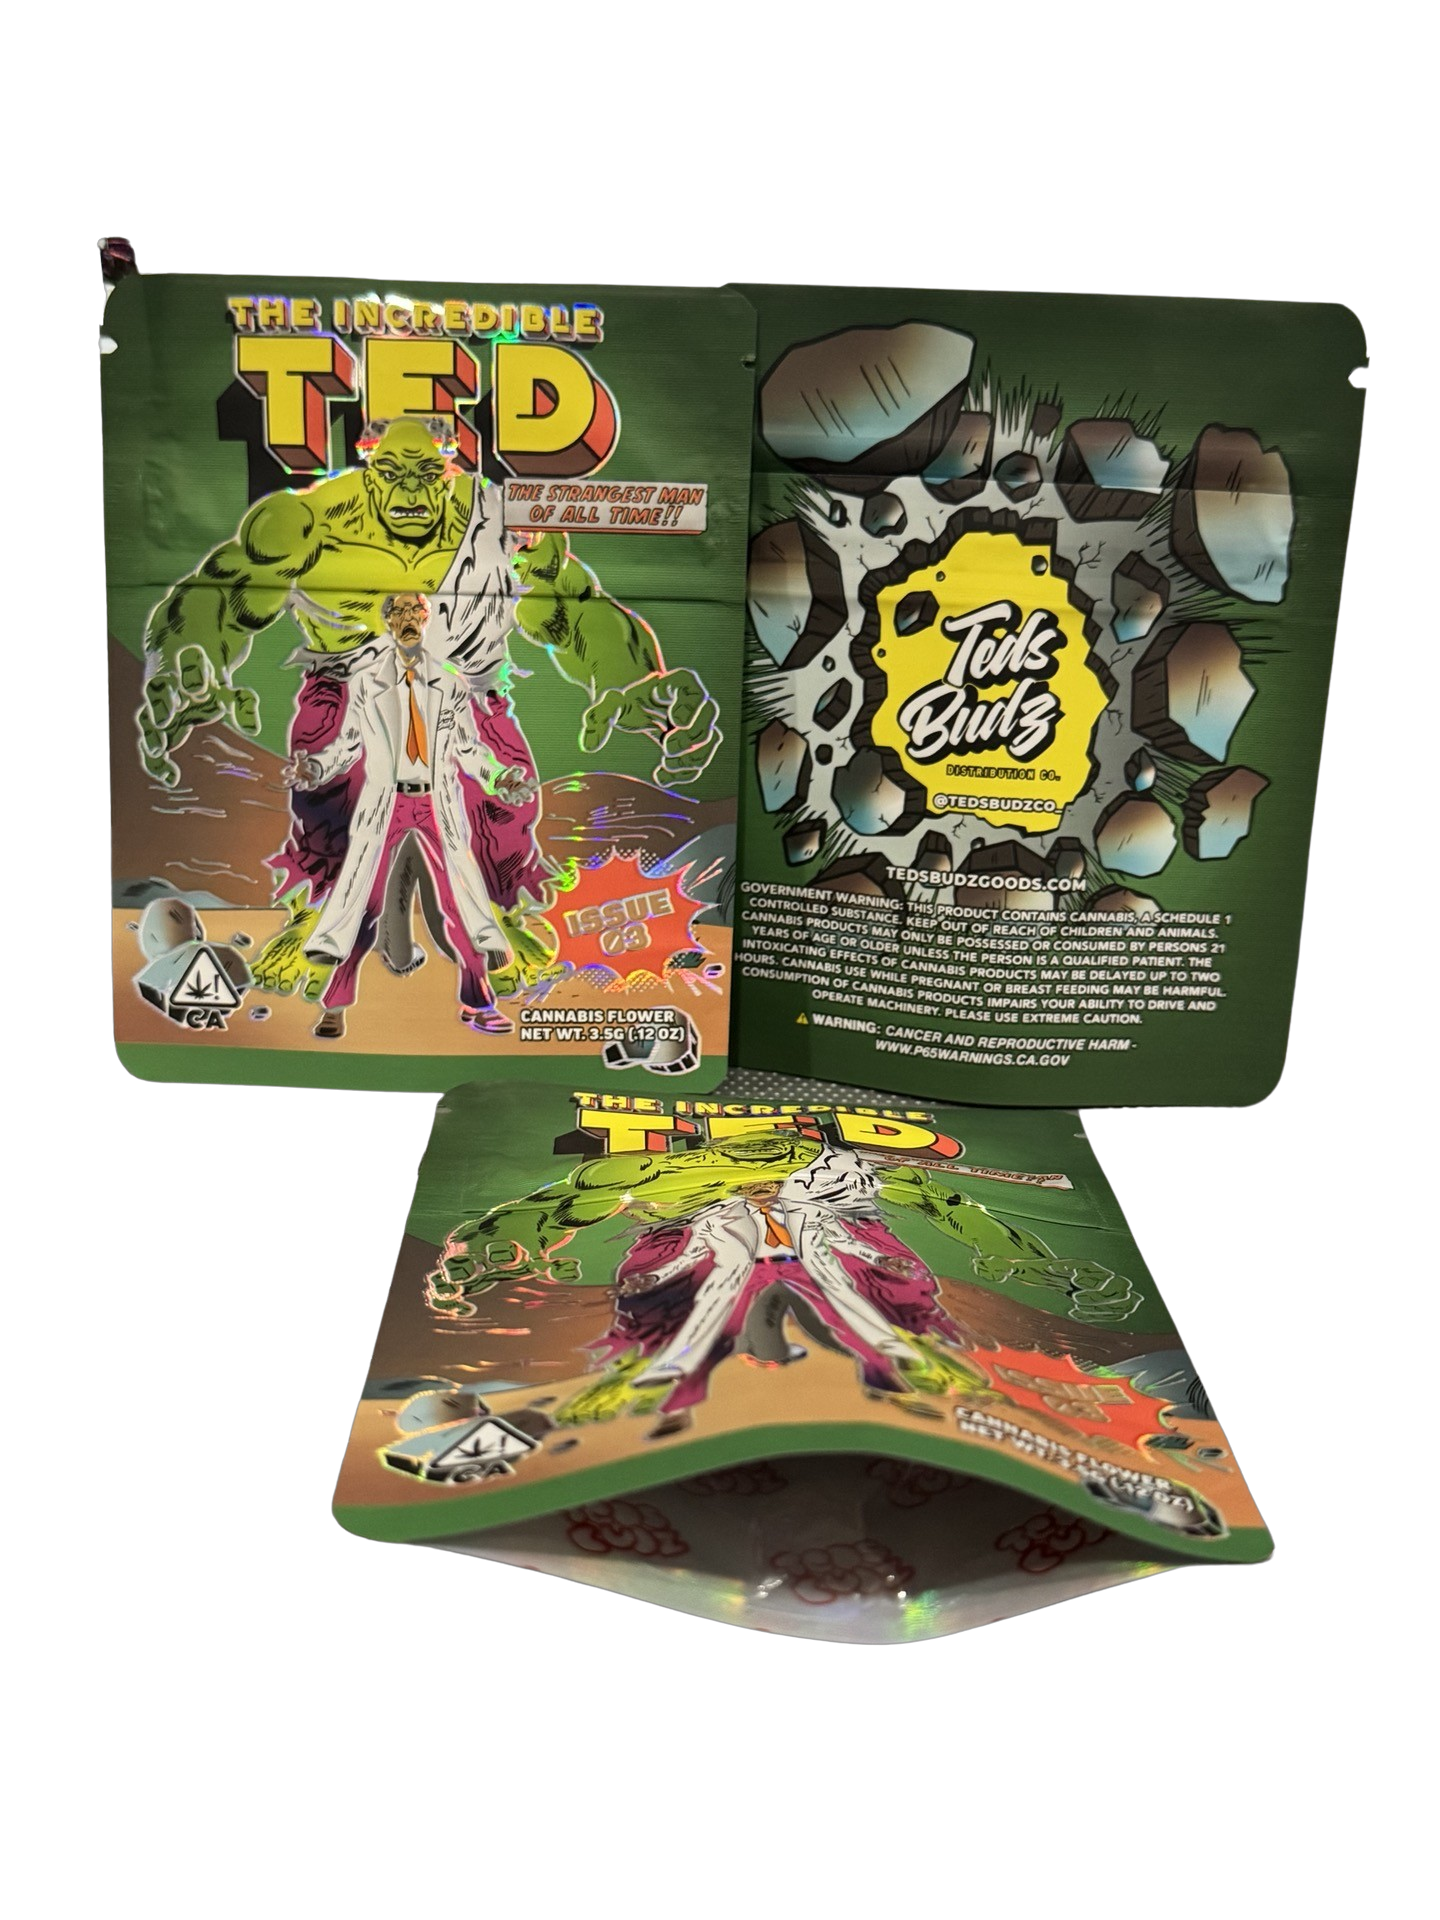 The Incredible TED Issue 3 Mylar Bags 3.5g Teds Budz